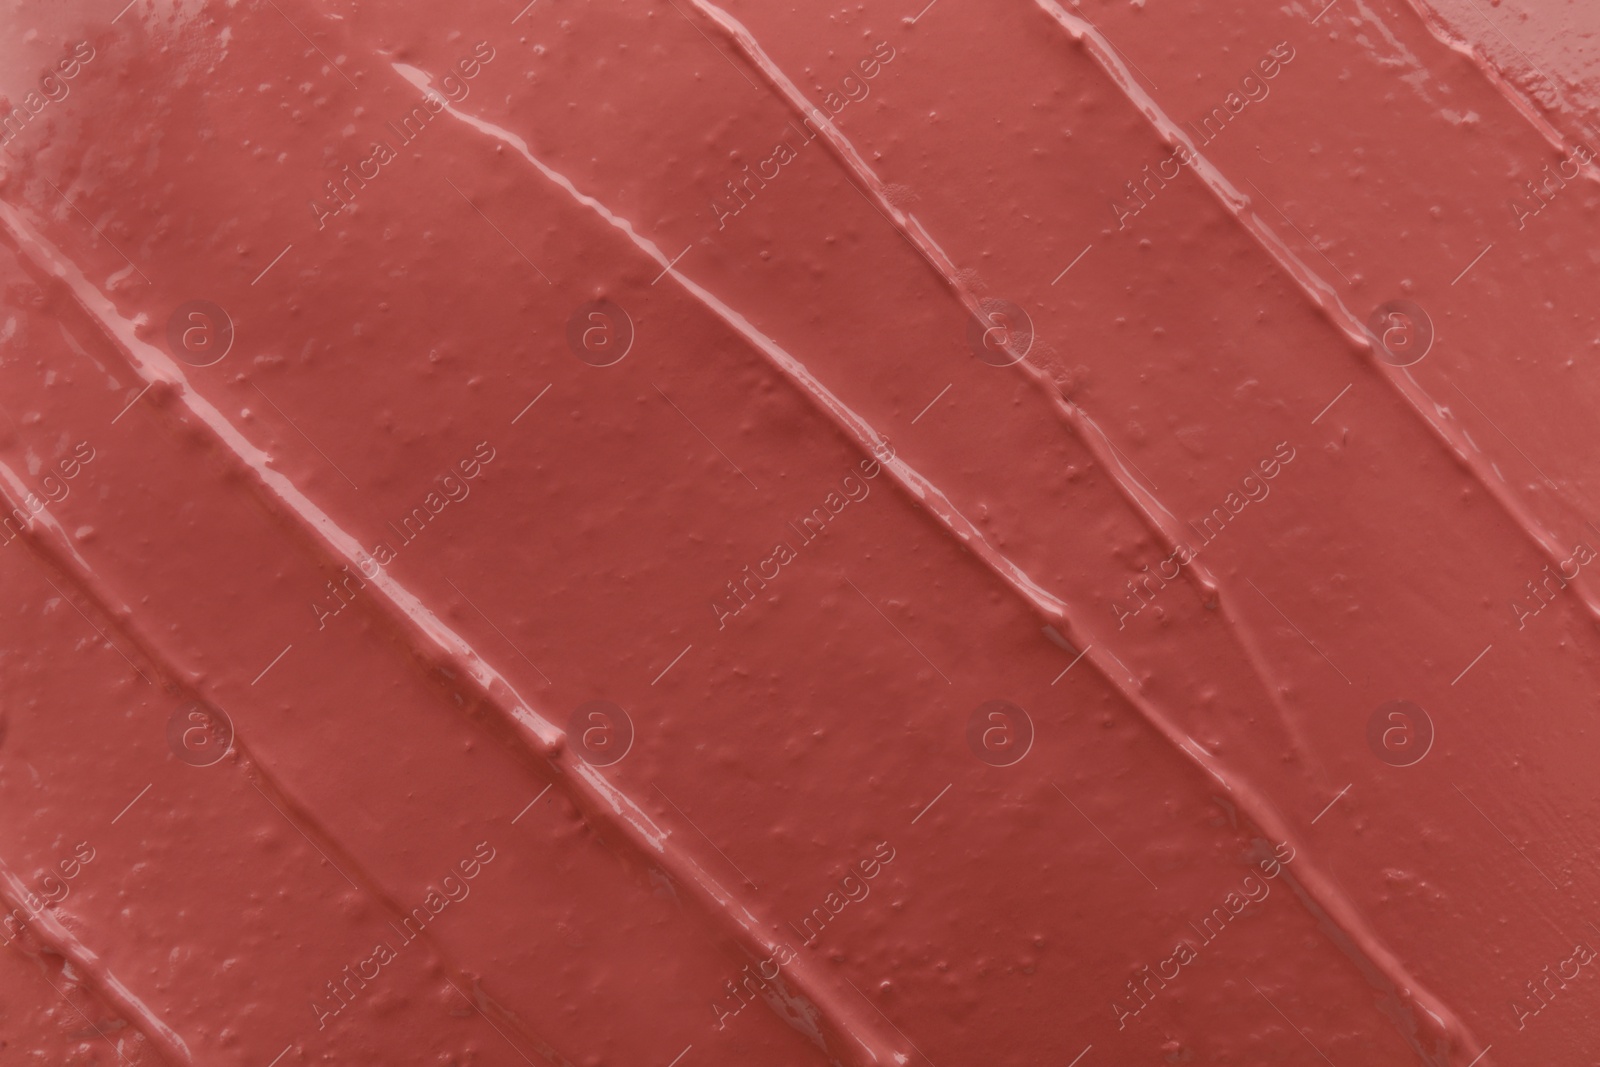 Photo of Coral liquid lipstick smudged as background, top view